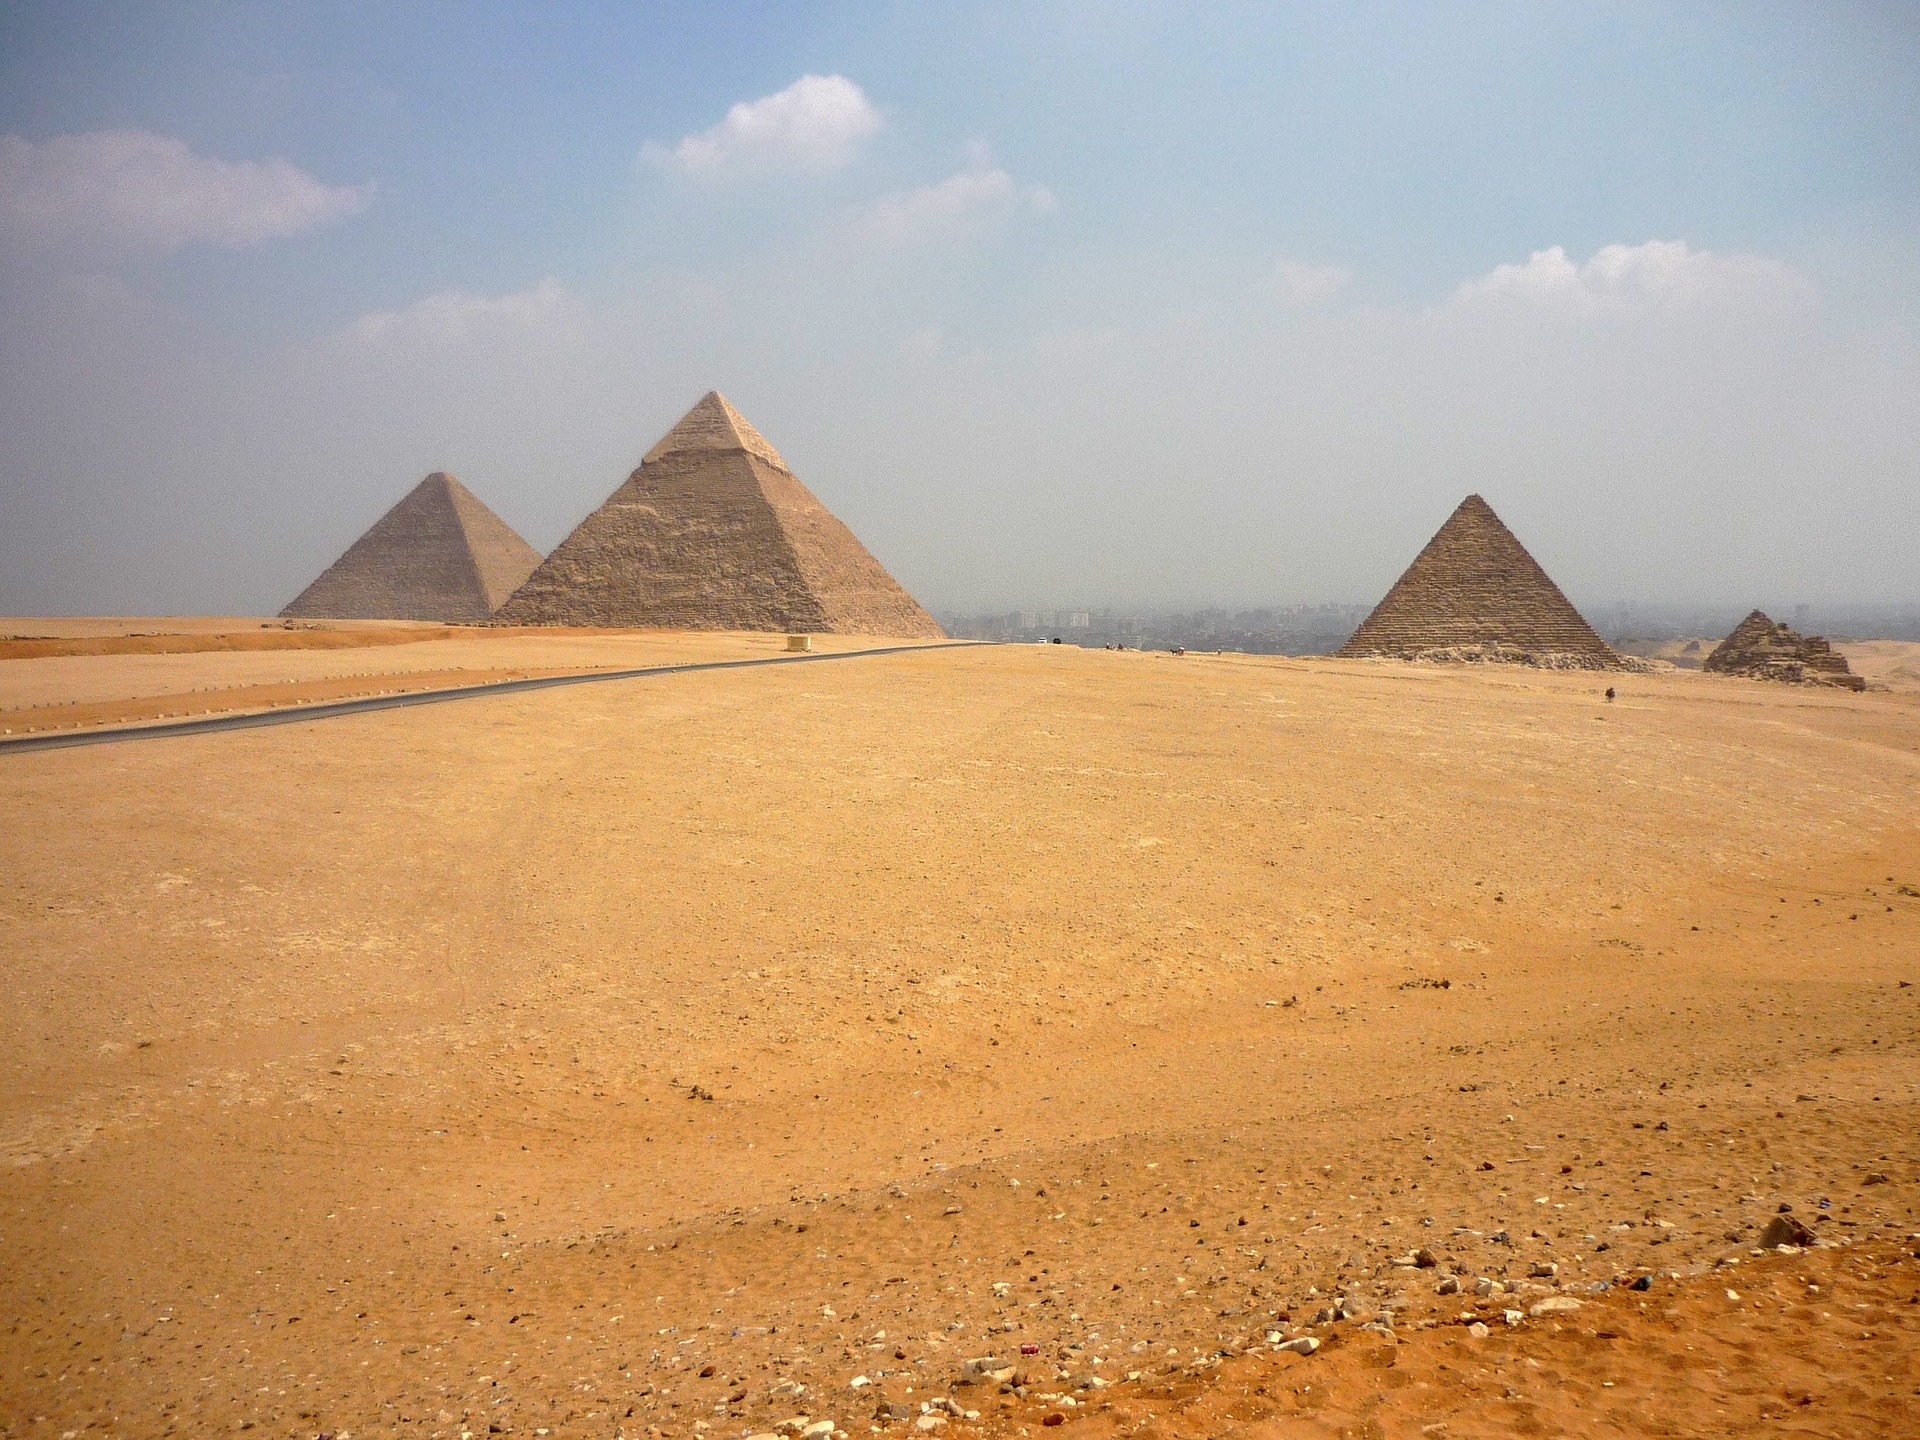 Pyramids of Giza, Historical site wonders, Ancient Egyptian legacy, Timeless beauty, 1920x1440 HD Desktop